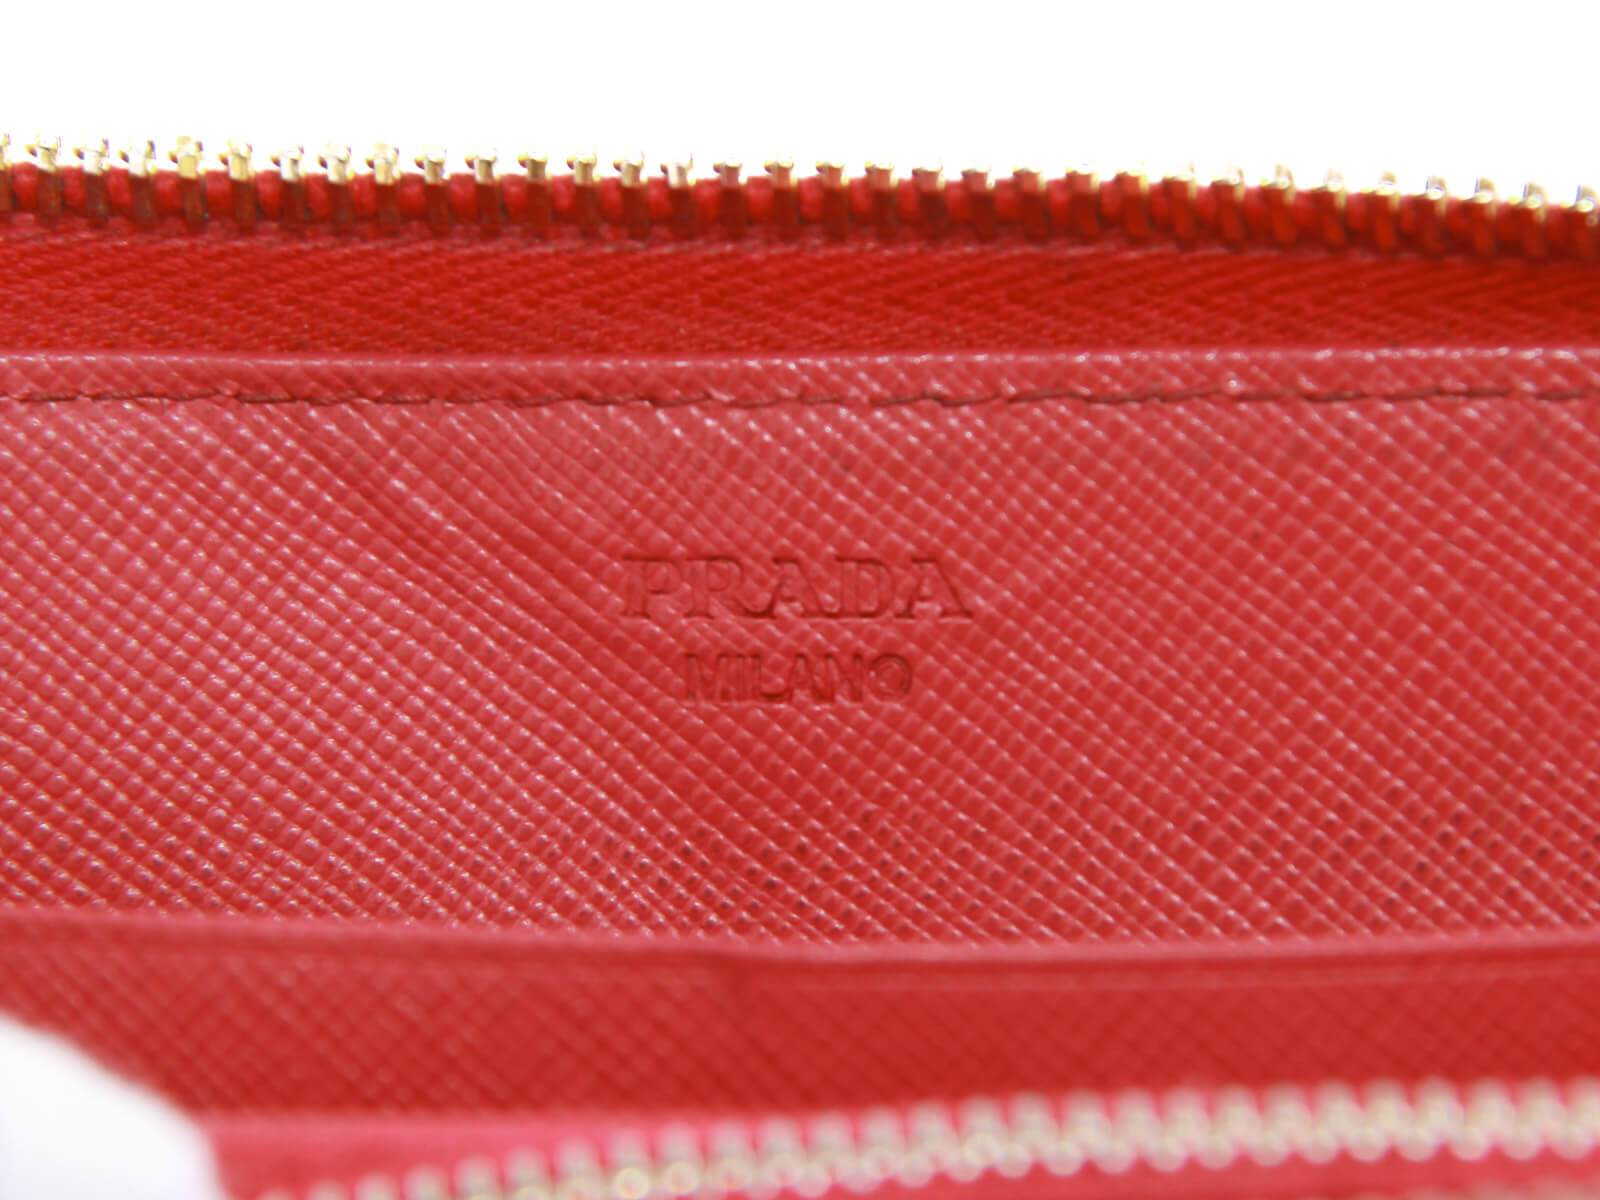 BNWT Pink Prada Small Saffiano Leather Wallet RARE Hard to Find